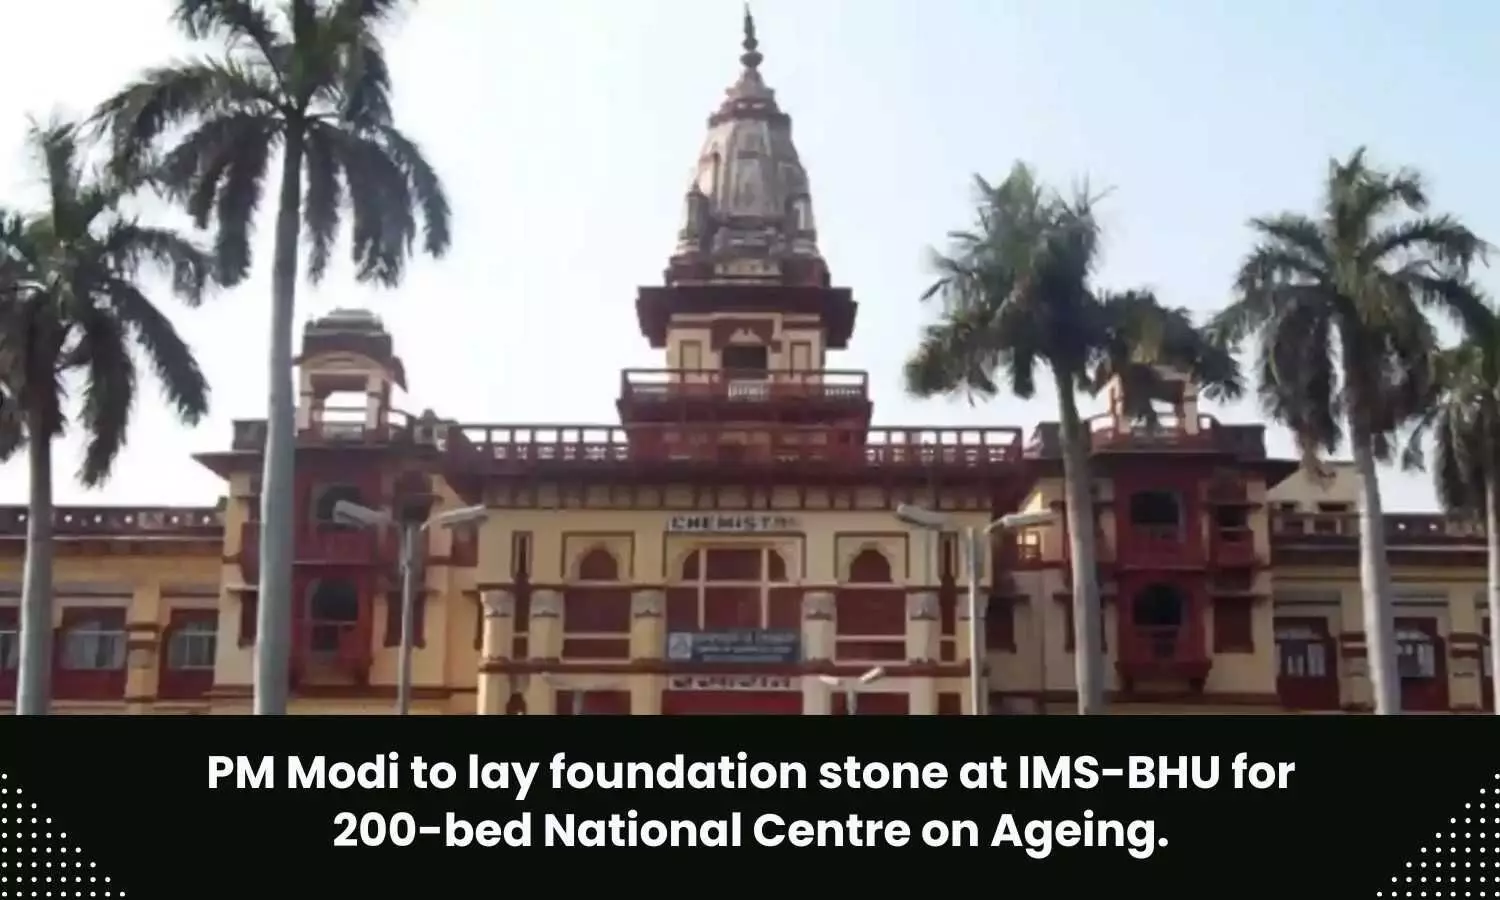 National Centre on Ageing to come up at IMS-BHU